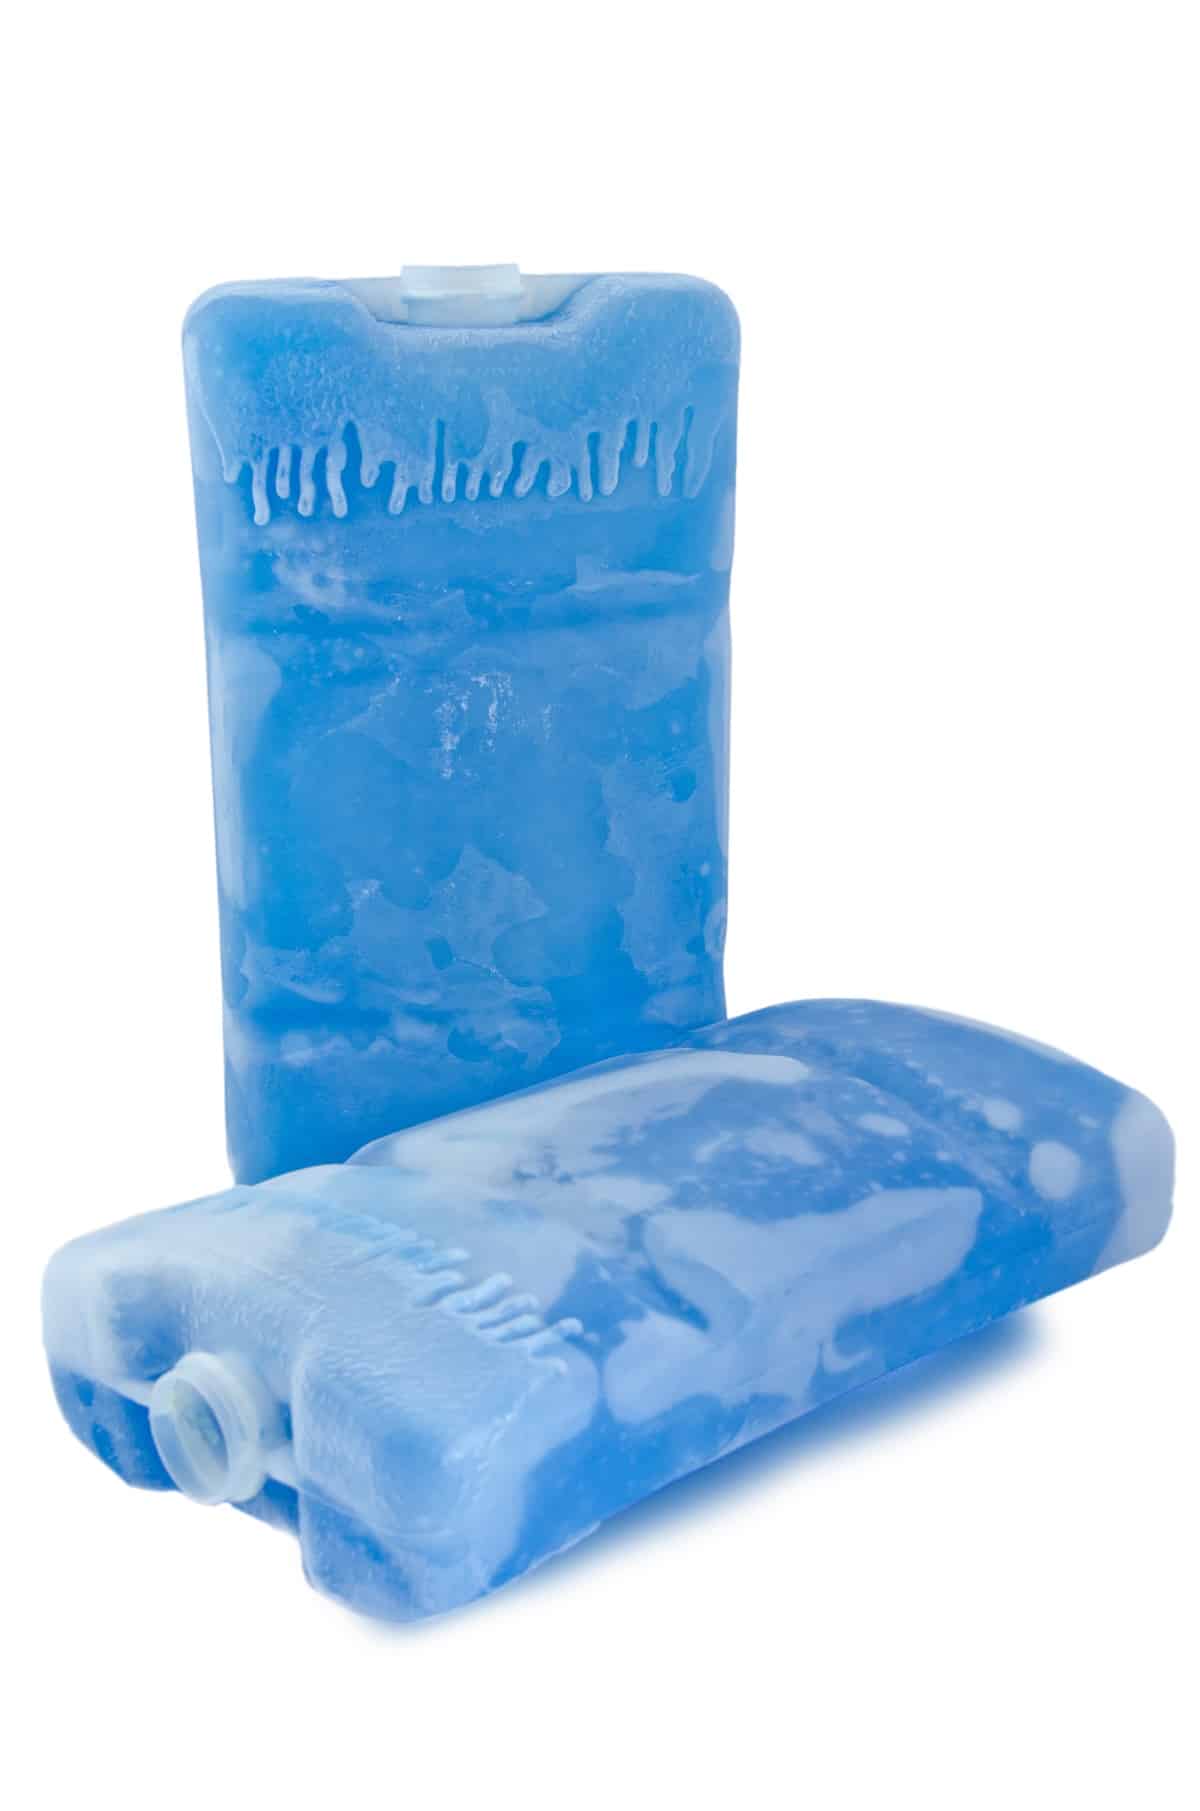 Blue ice packs with one laying down.